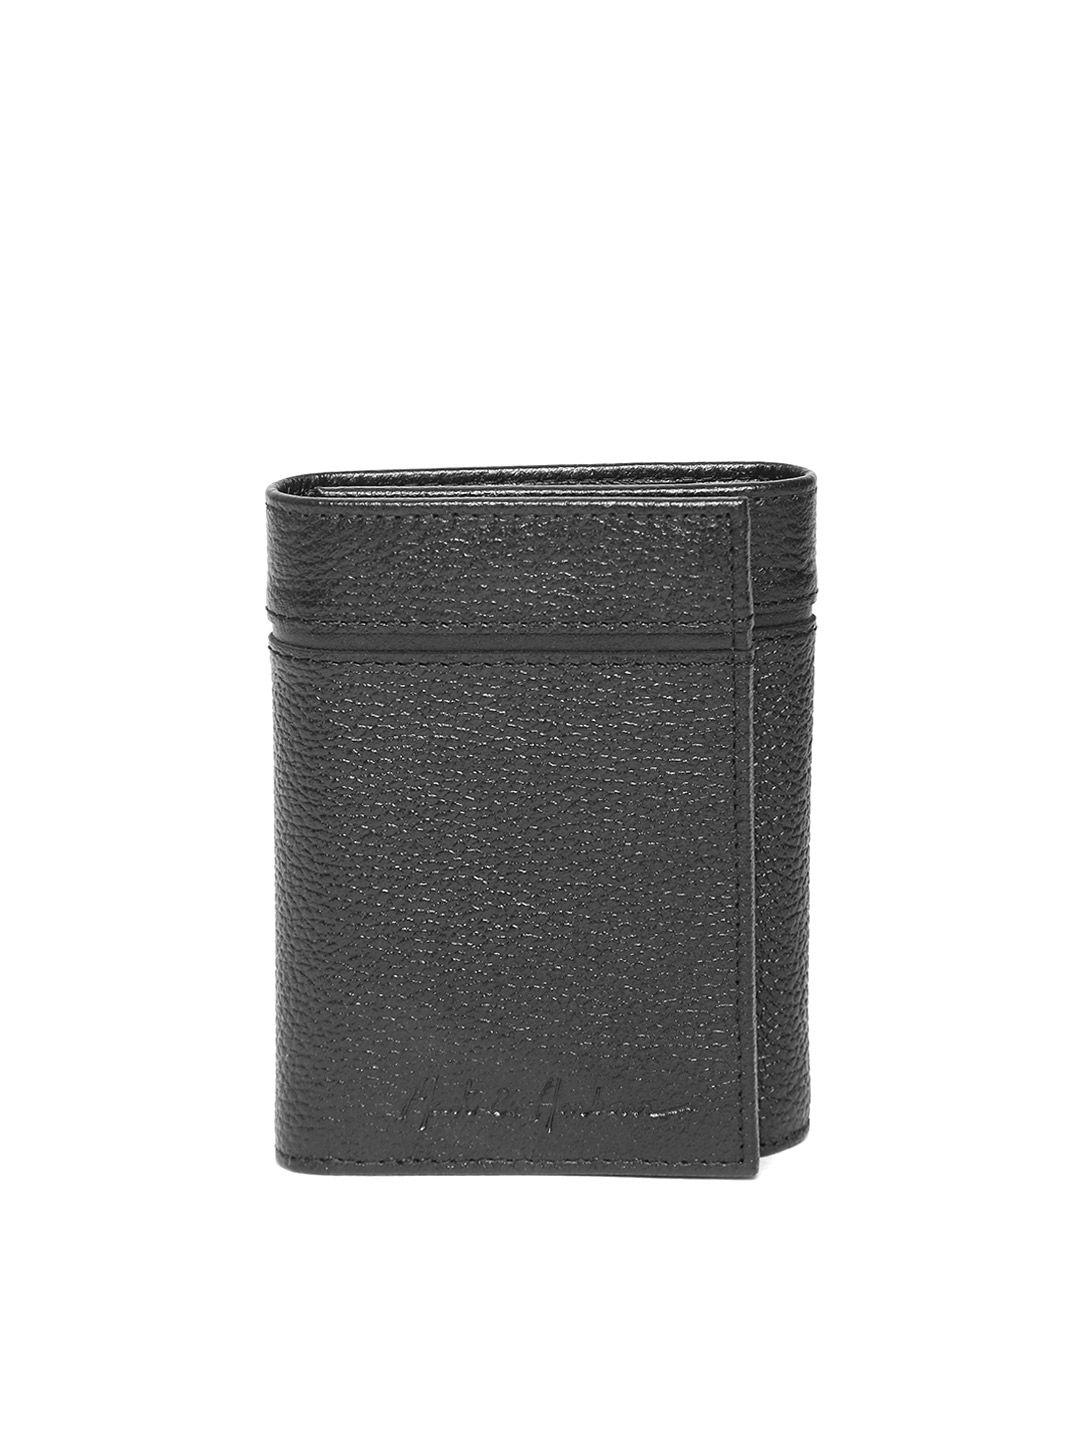 mast & harbour men black solid leather three fold wallet